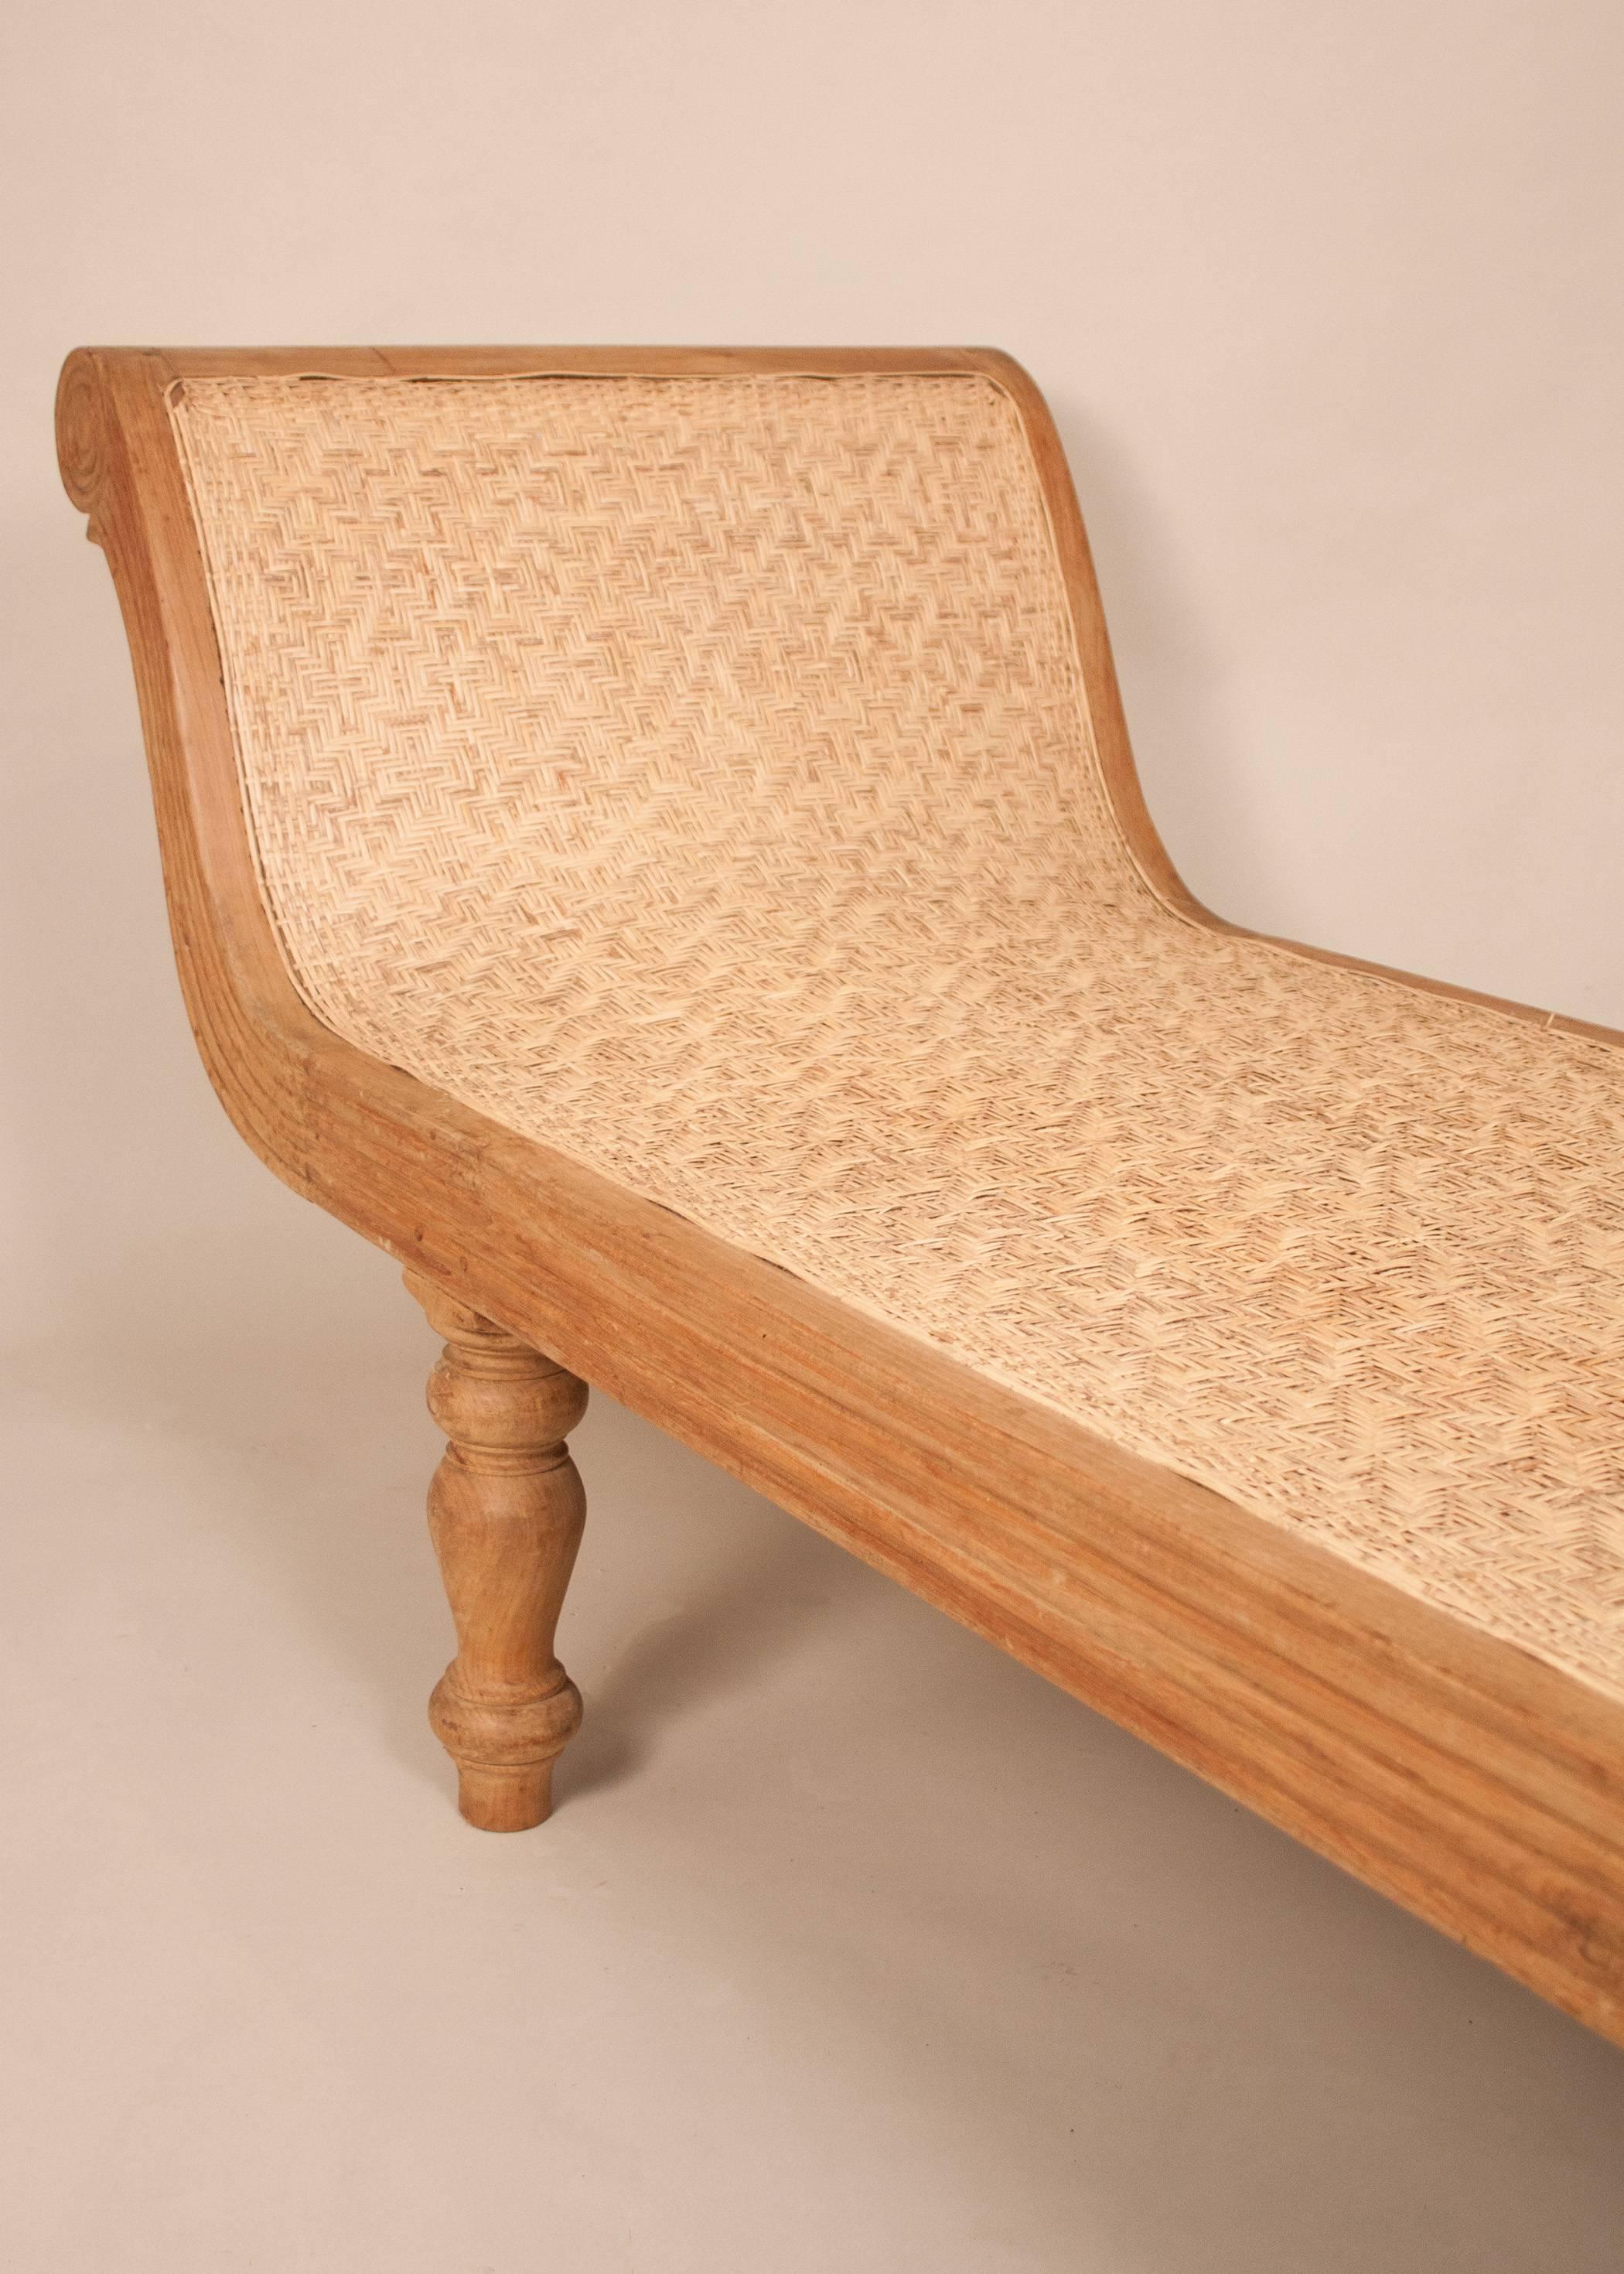 Long, sleek, tropical teak wood Anglo-Indian chaise lounges, circa 1970. This antique daybed features handwoven caning, simple carved details and shapely turned legs.